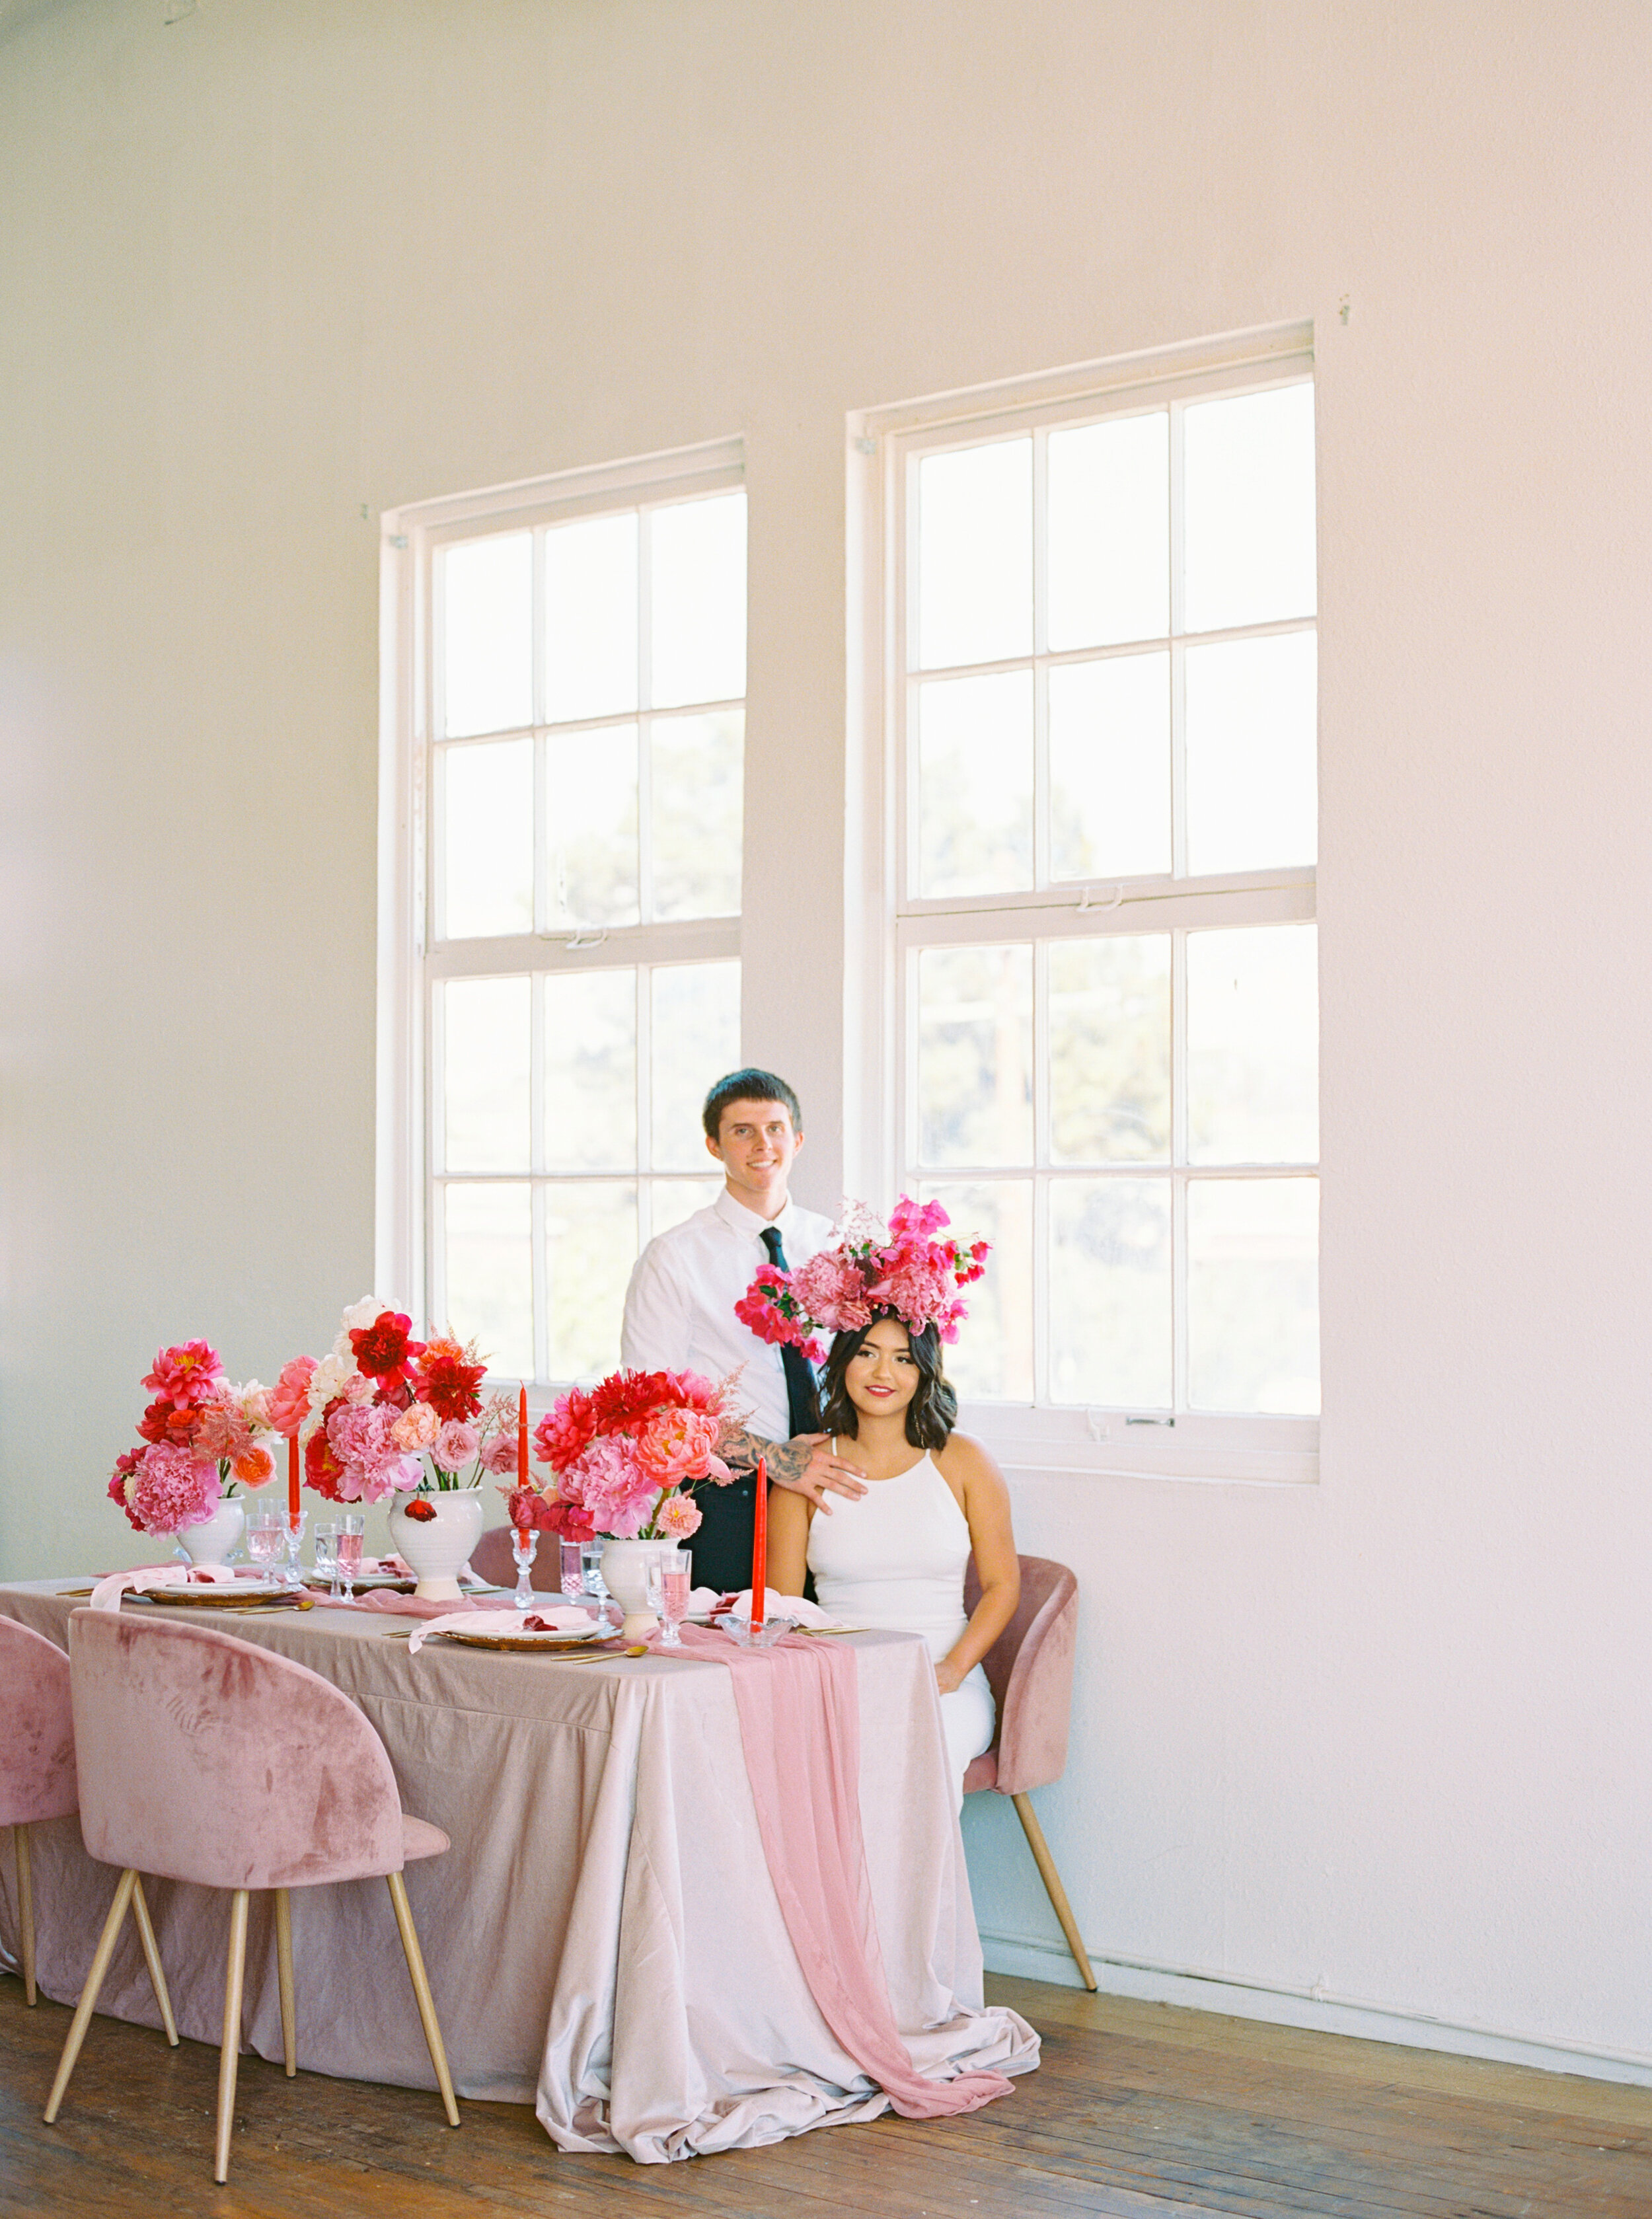 A Romantic Wedding Elopement Filled with Colorful Fuchsia - Sarahi Hadden Submission-24.jpg